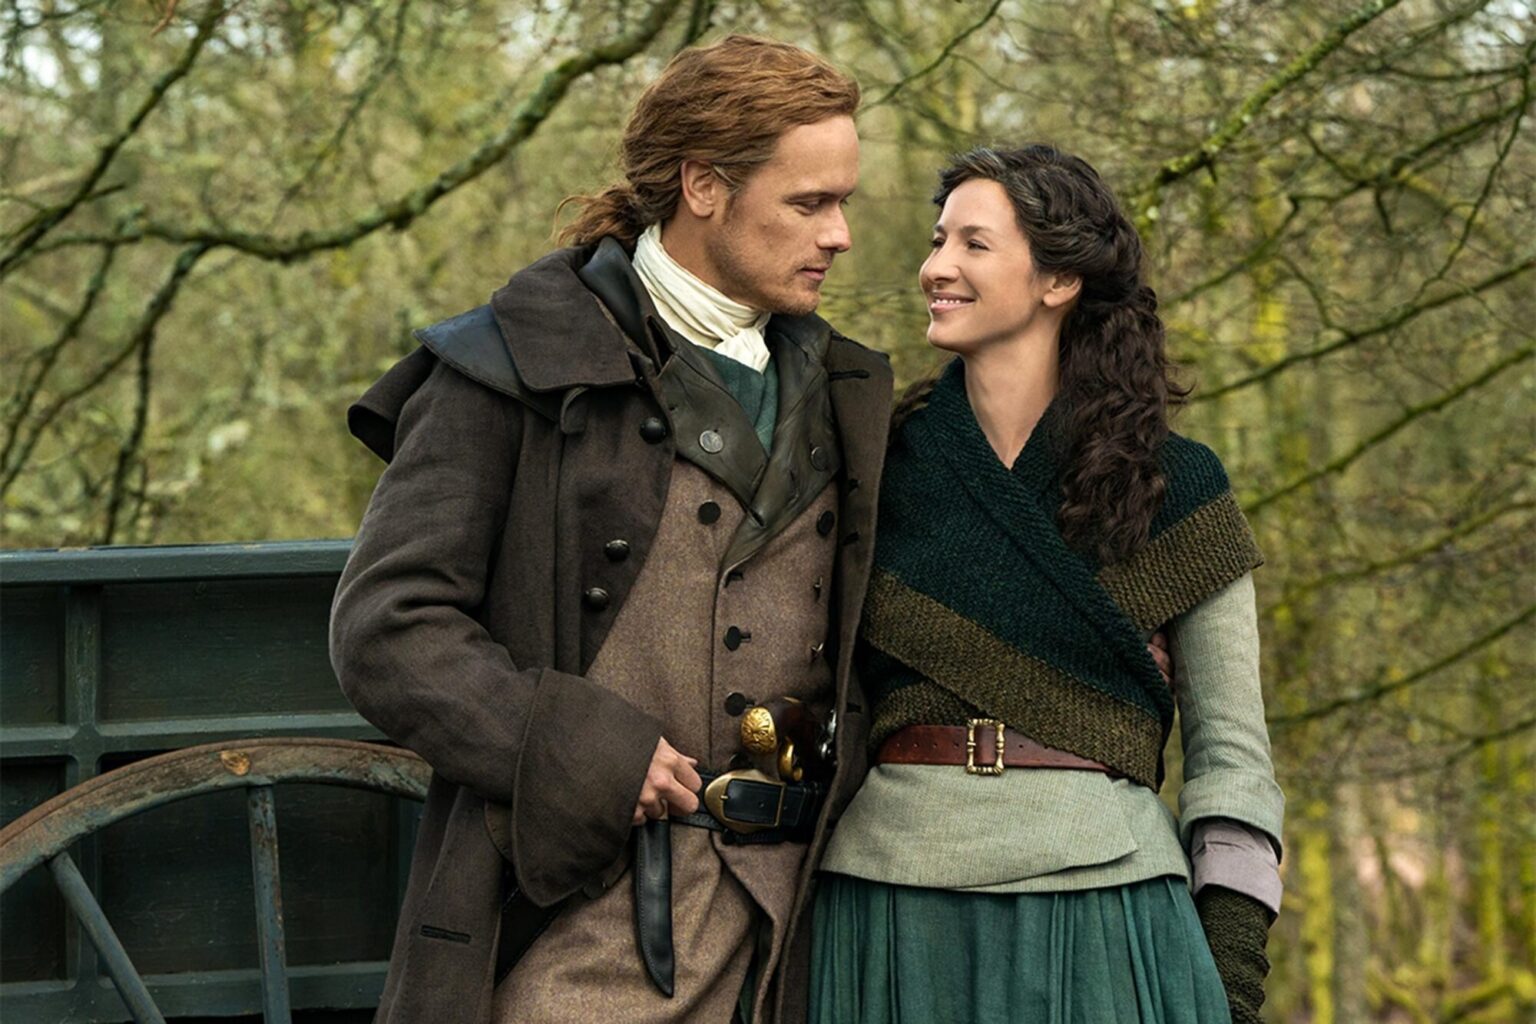 Based on Diana Gabaldon’s eponymous historical fiction series, 'Outlander' is a historical drama set in Scotland. When will the new season arrive on Starz?